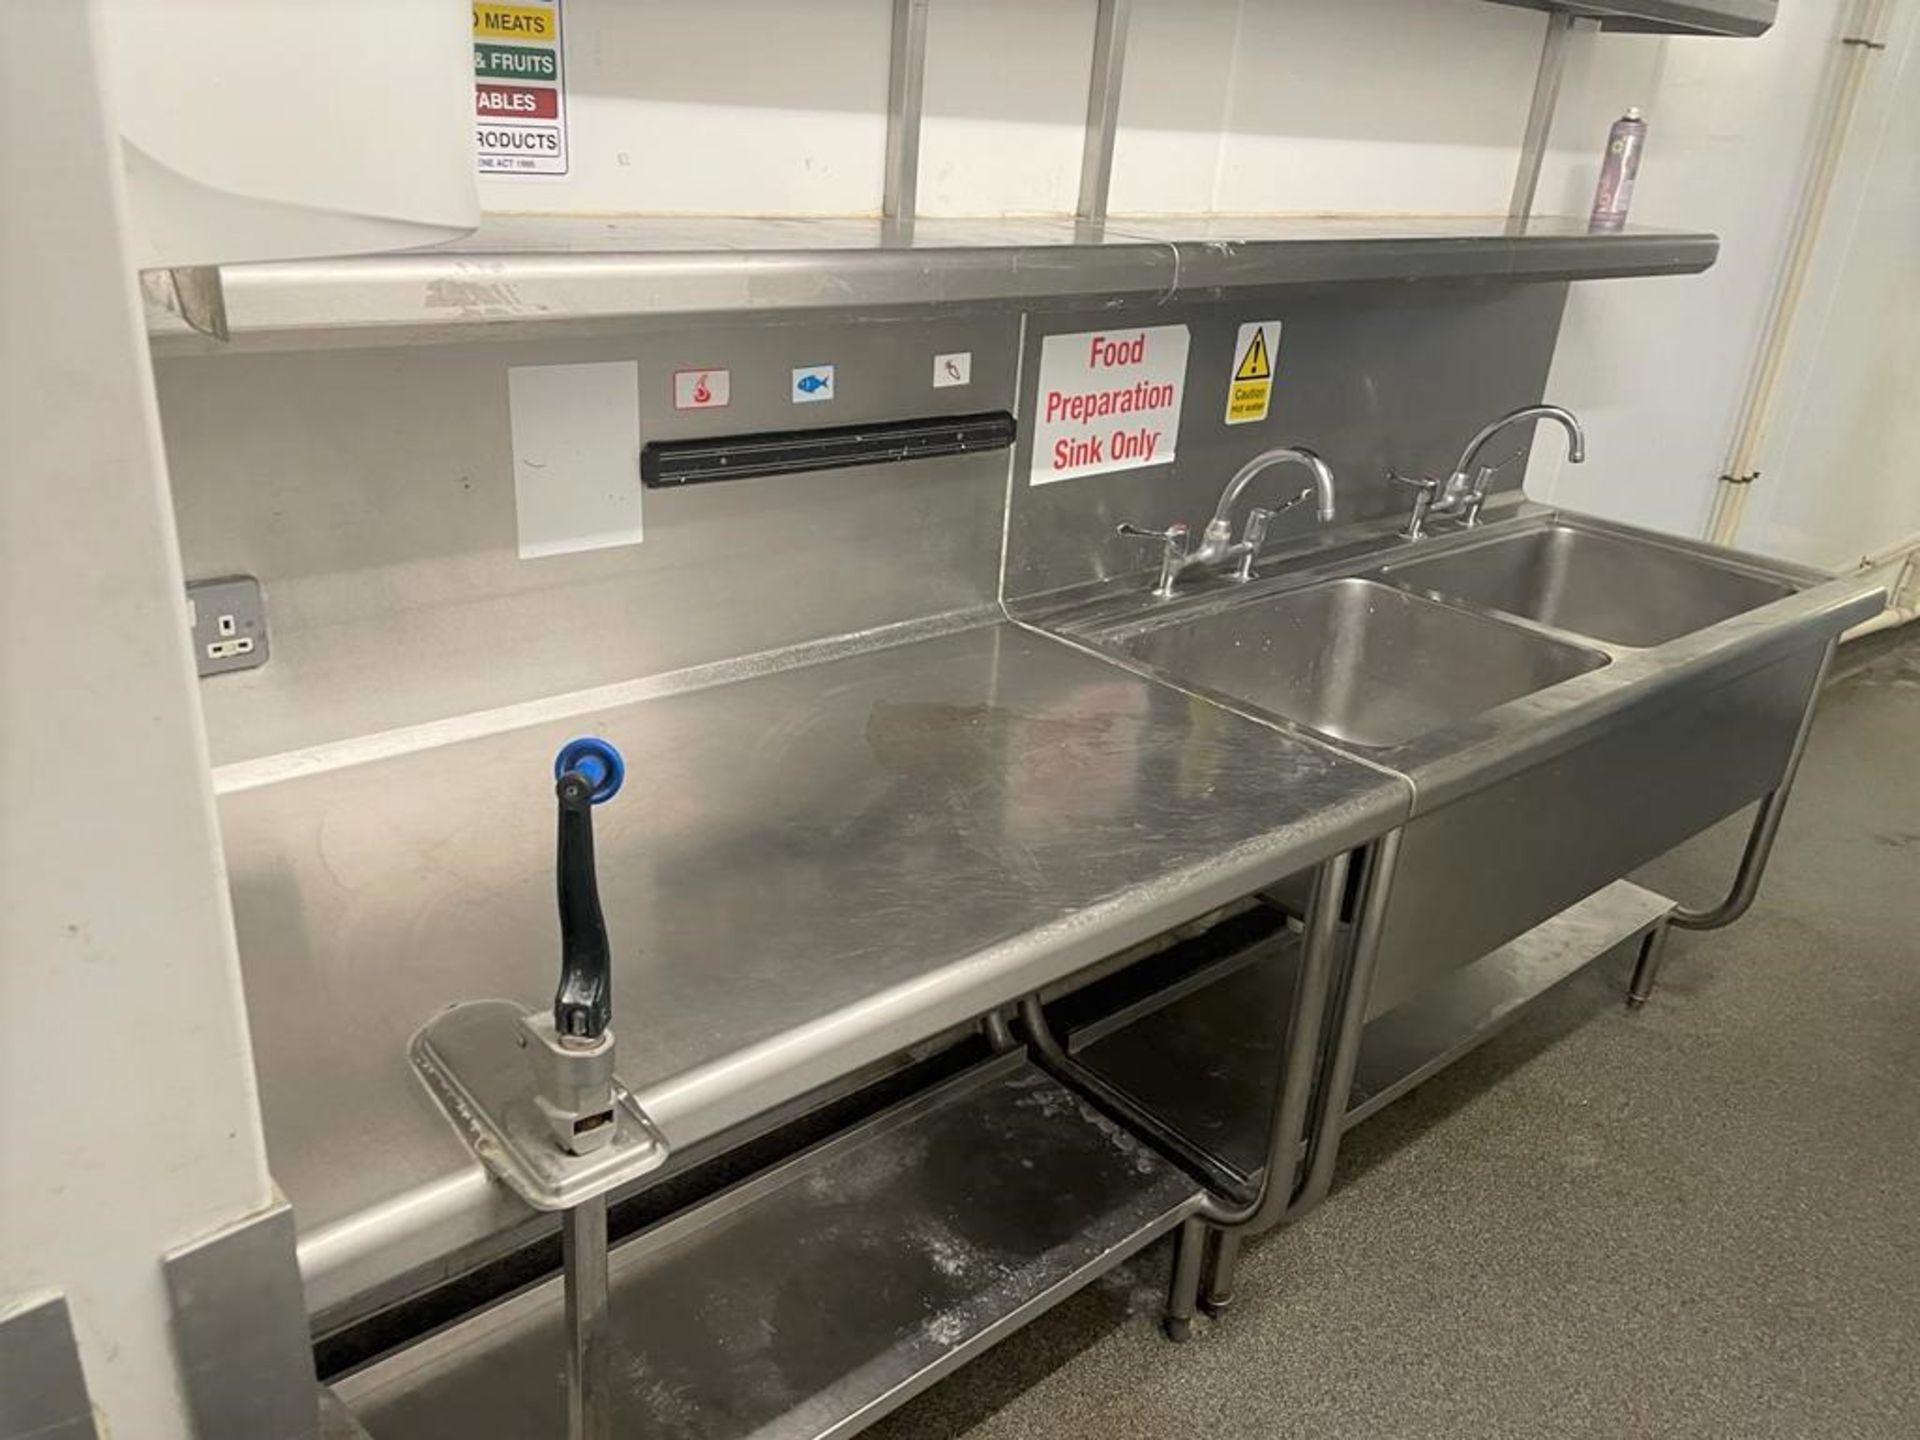 1 x Stainless Steel Commercial Wash Stand With Twin Sink Basins, Mixer Taps, Overhead Shelves, - Image 8 of 10